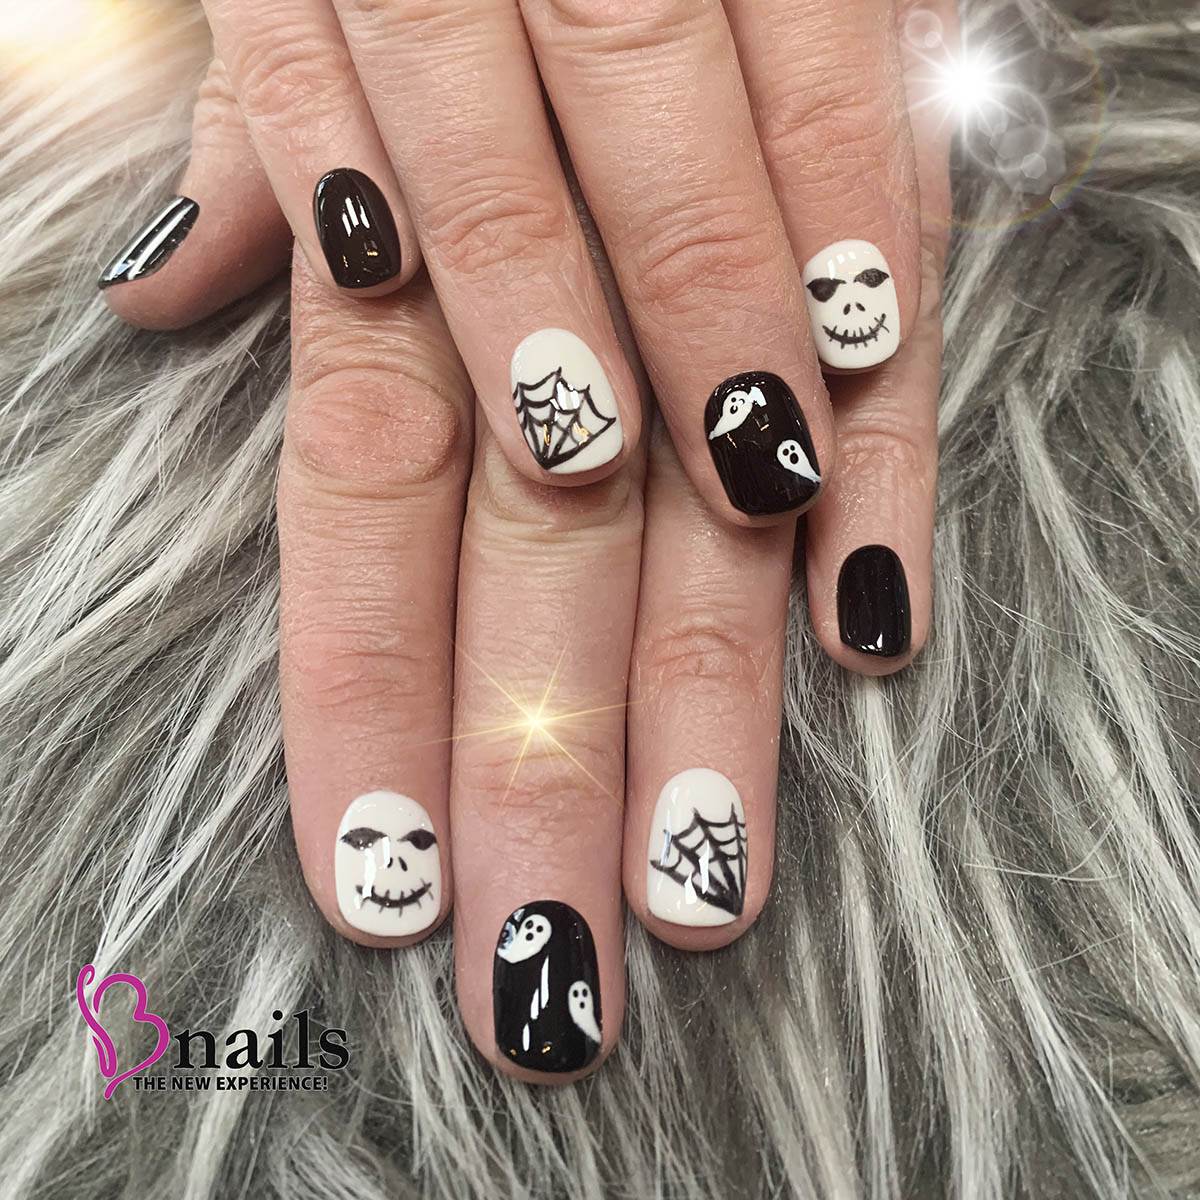 Nail Design Ideas| Nail Design Images | Nail Designs Pictures 2020